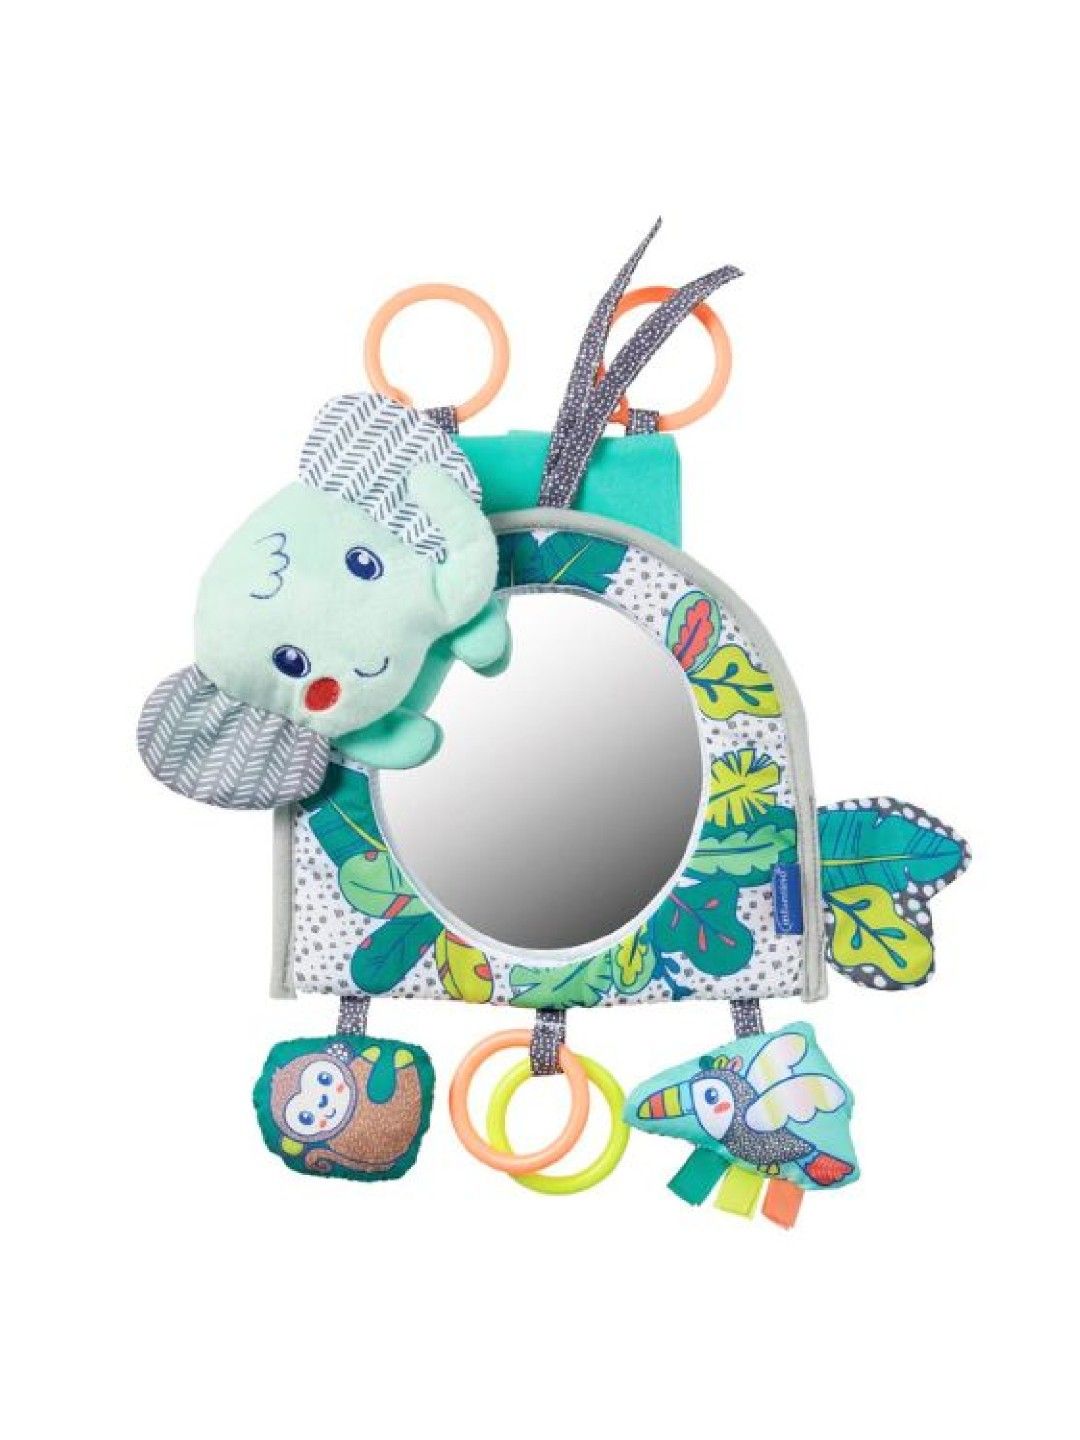 Infantino Discover & Play Activity Mirror